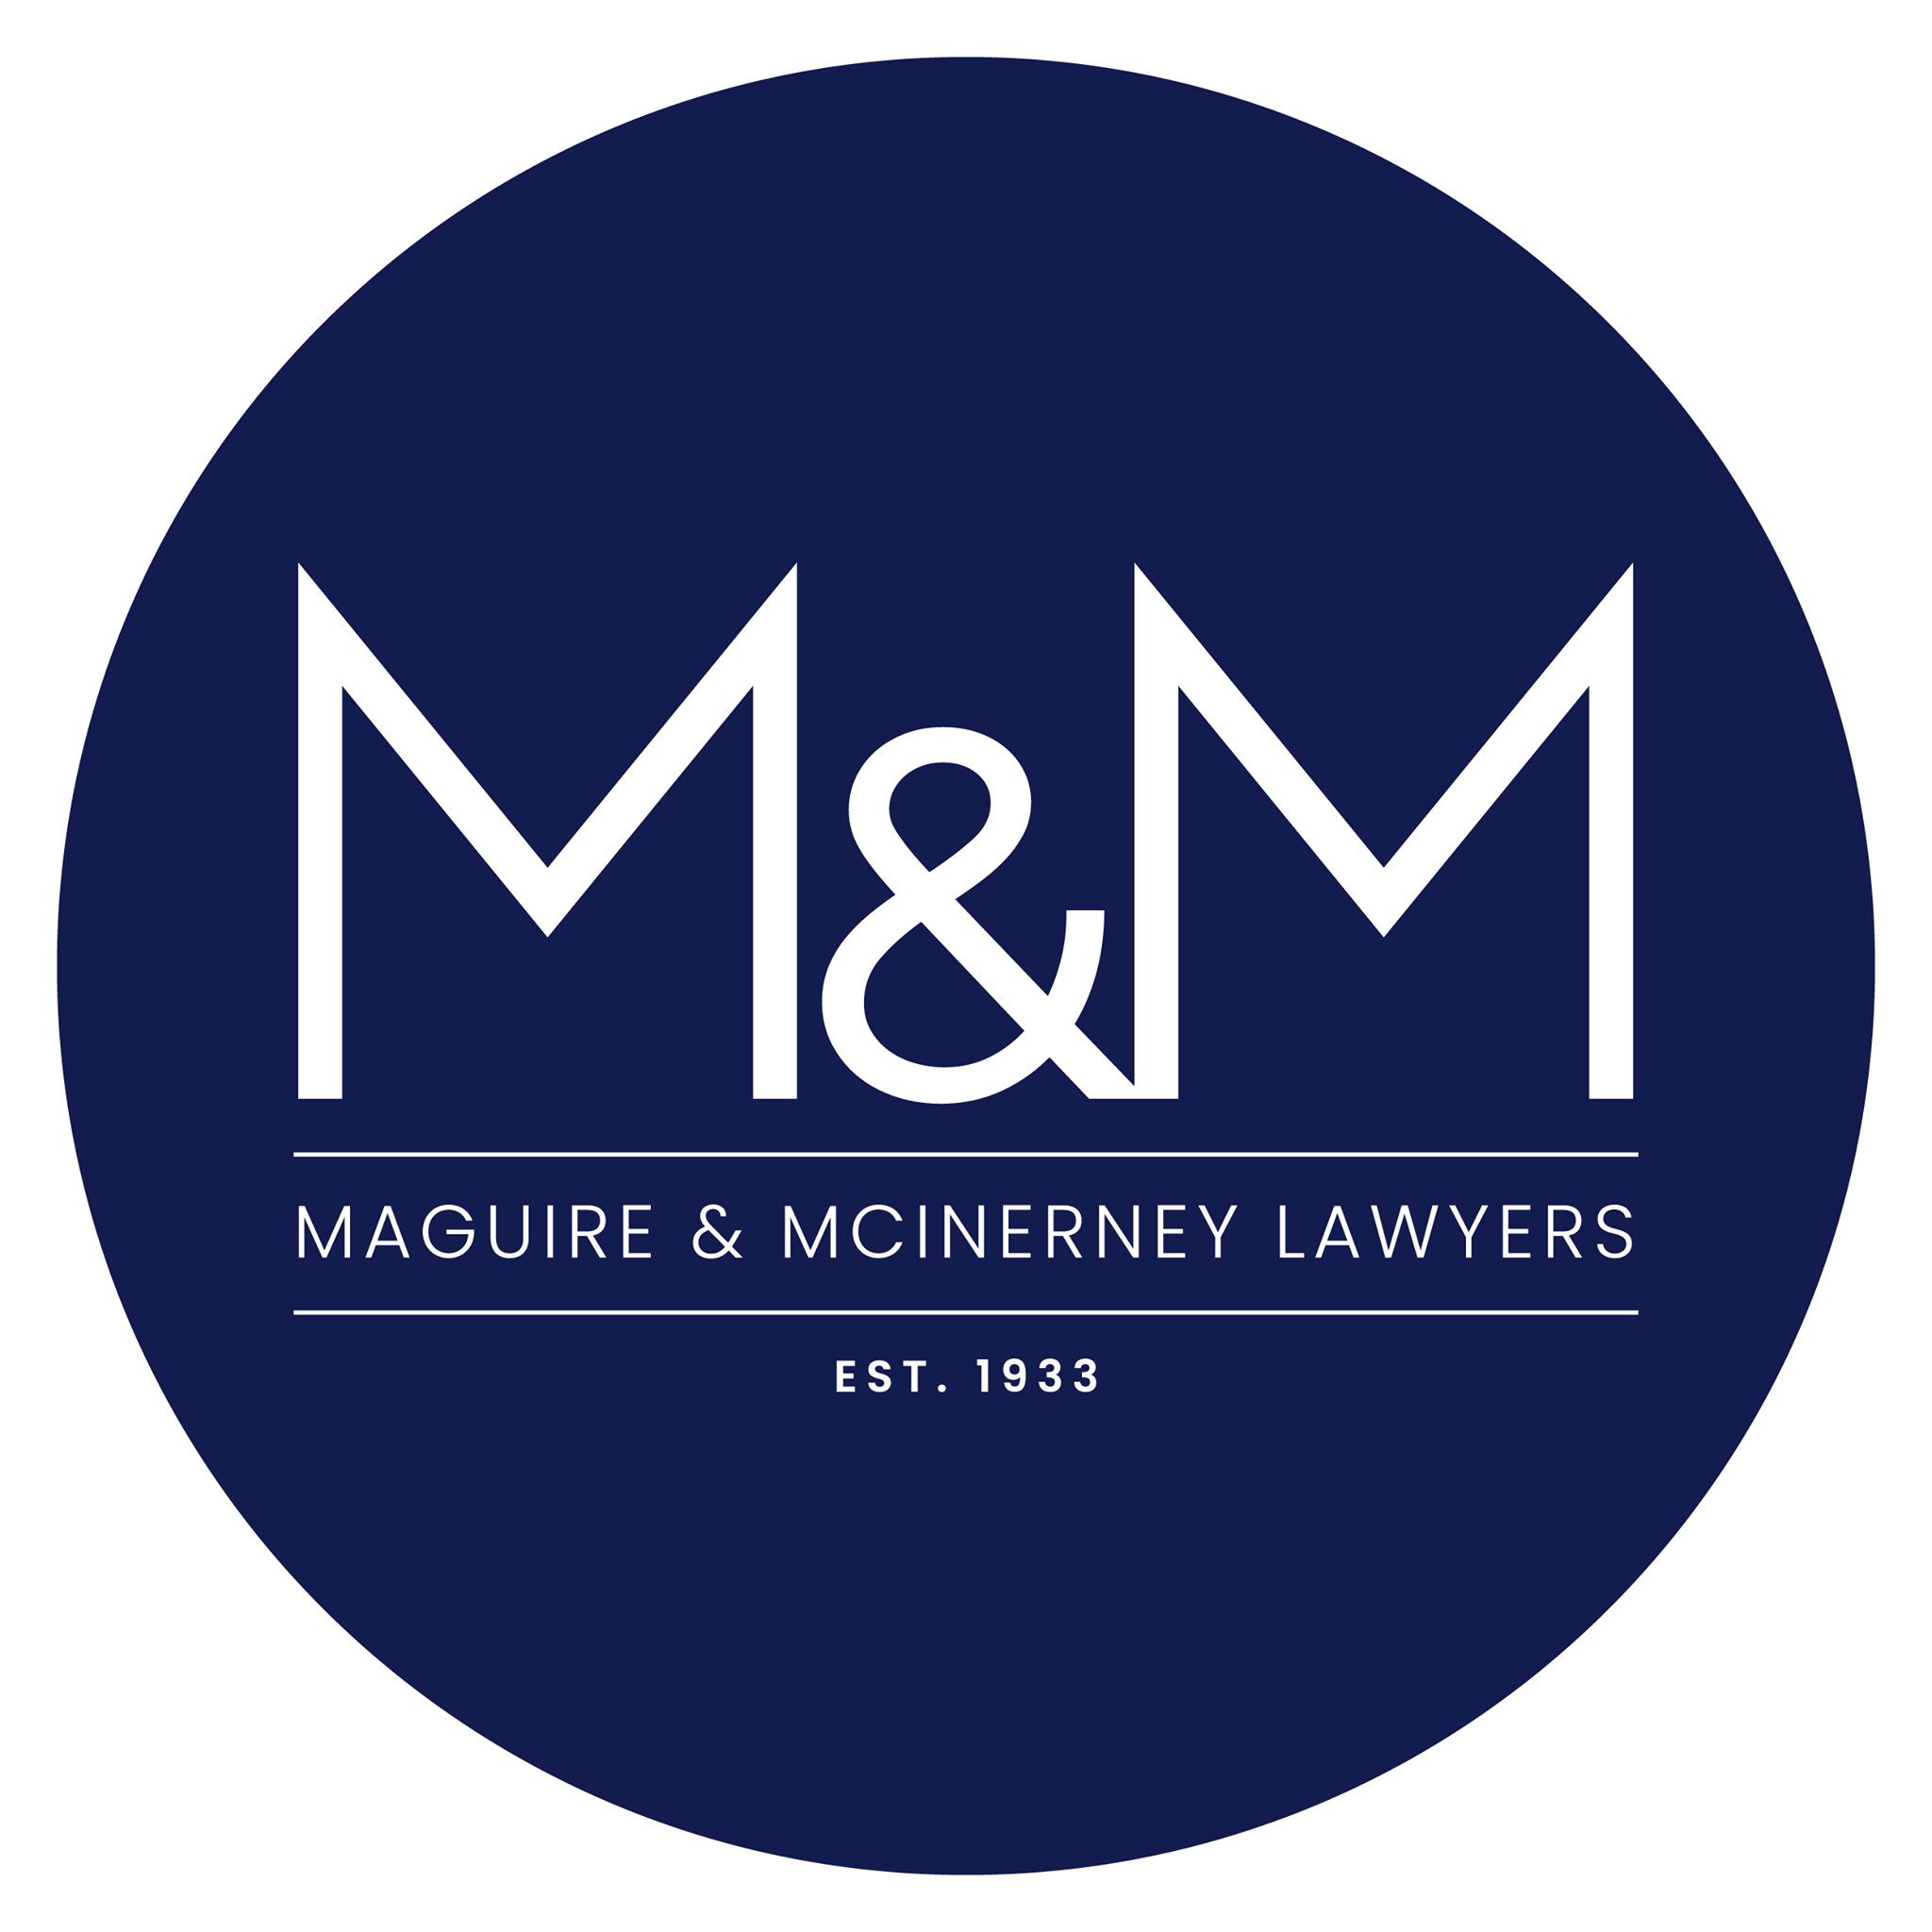 Company logo of Maguire & McInerney Lawyers